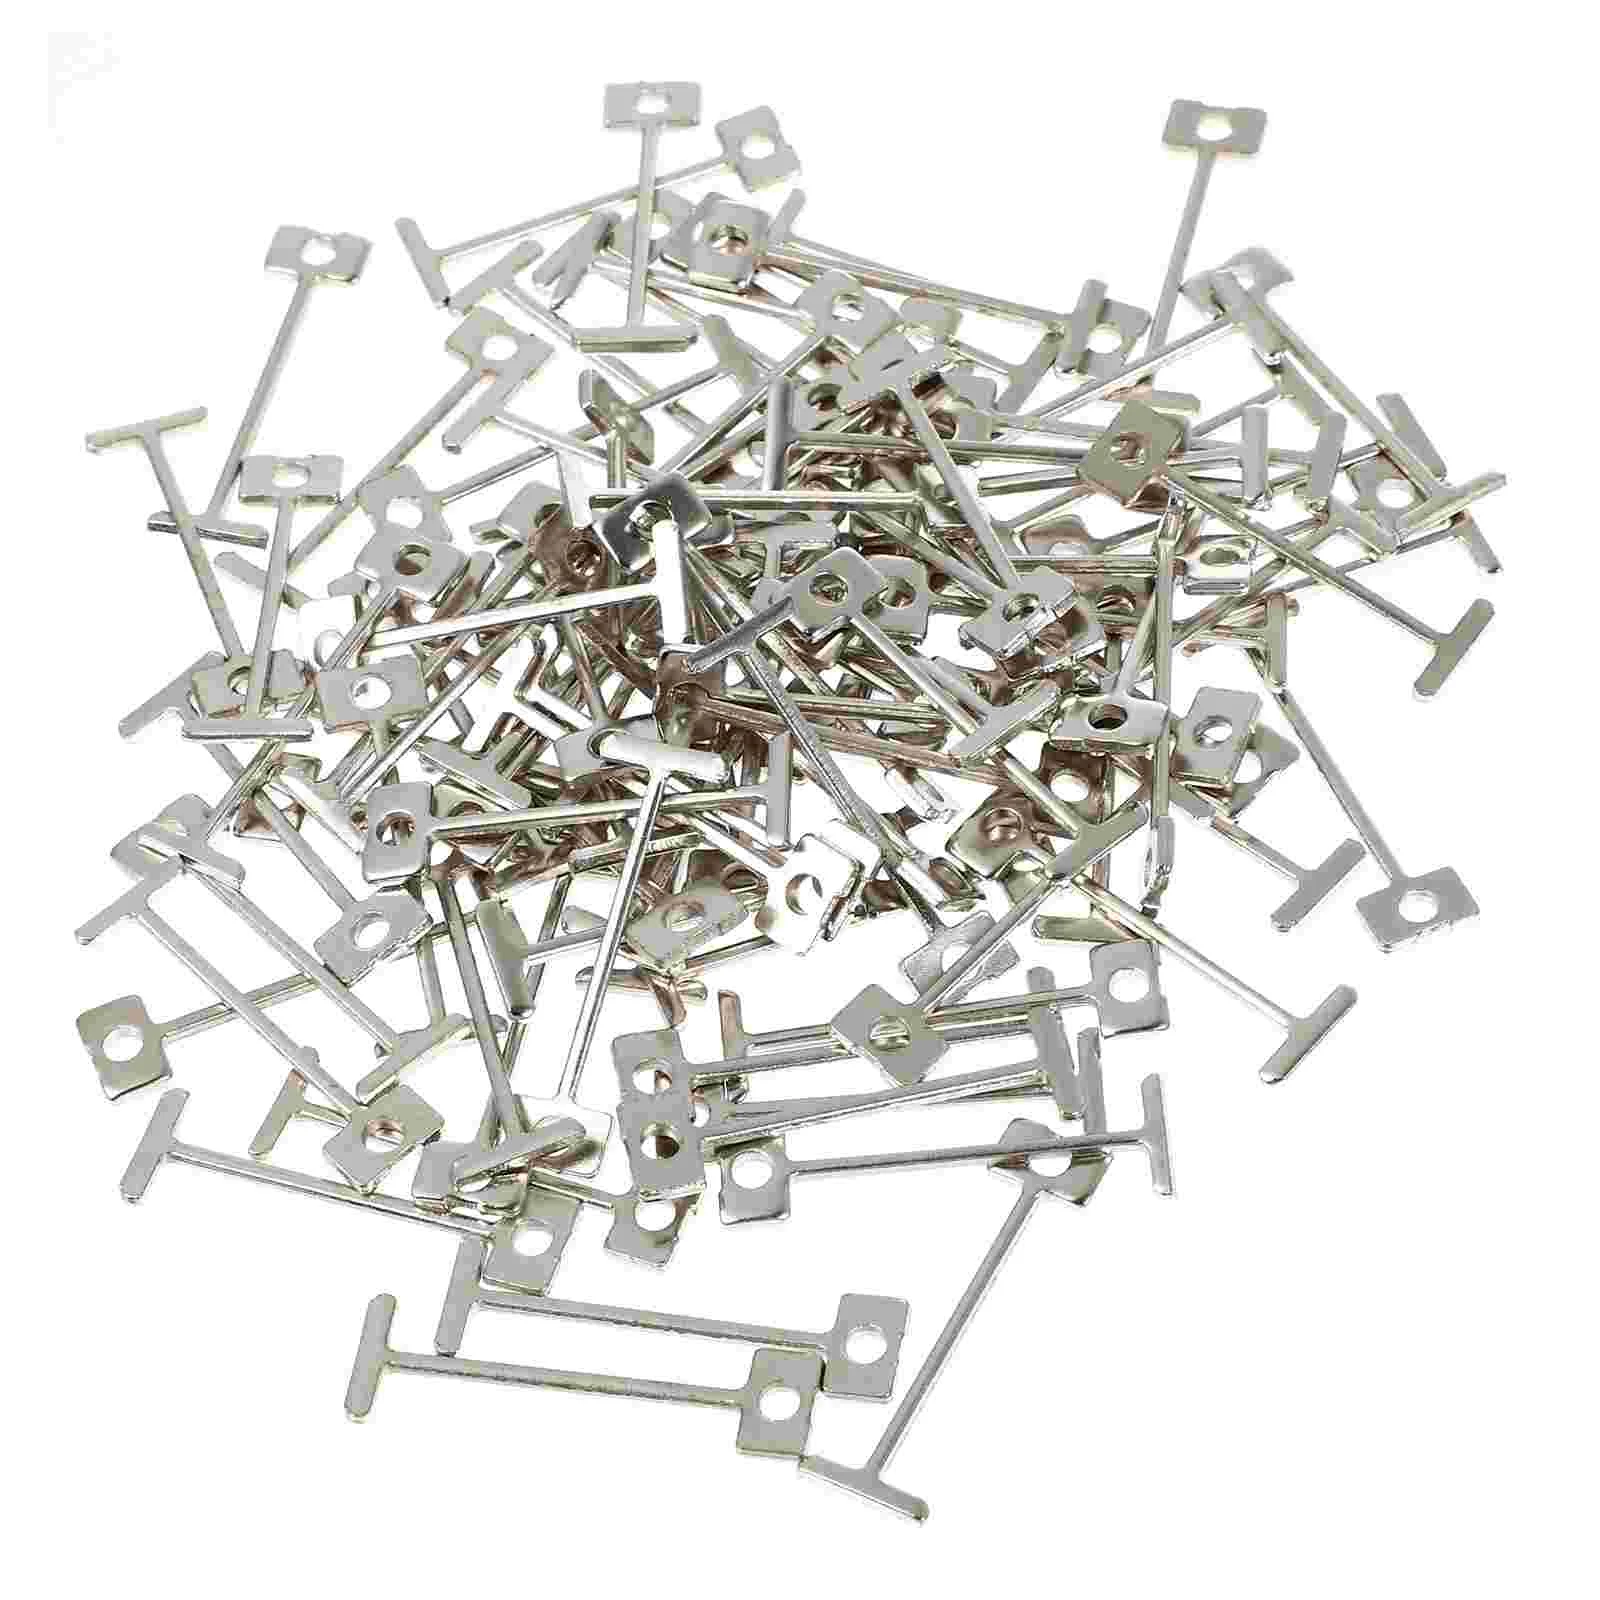 

100 Pcs Tile Leveling Steel Needle Flooring Spacers Replaceable Leveler Parts Pin